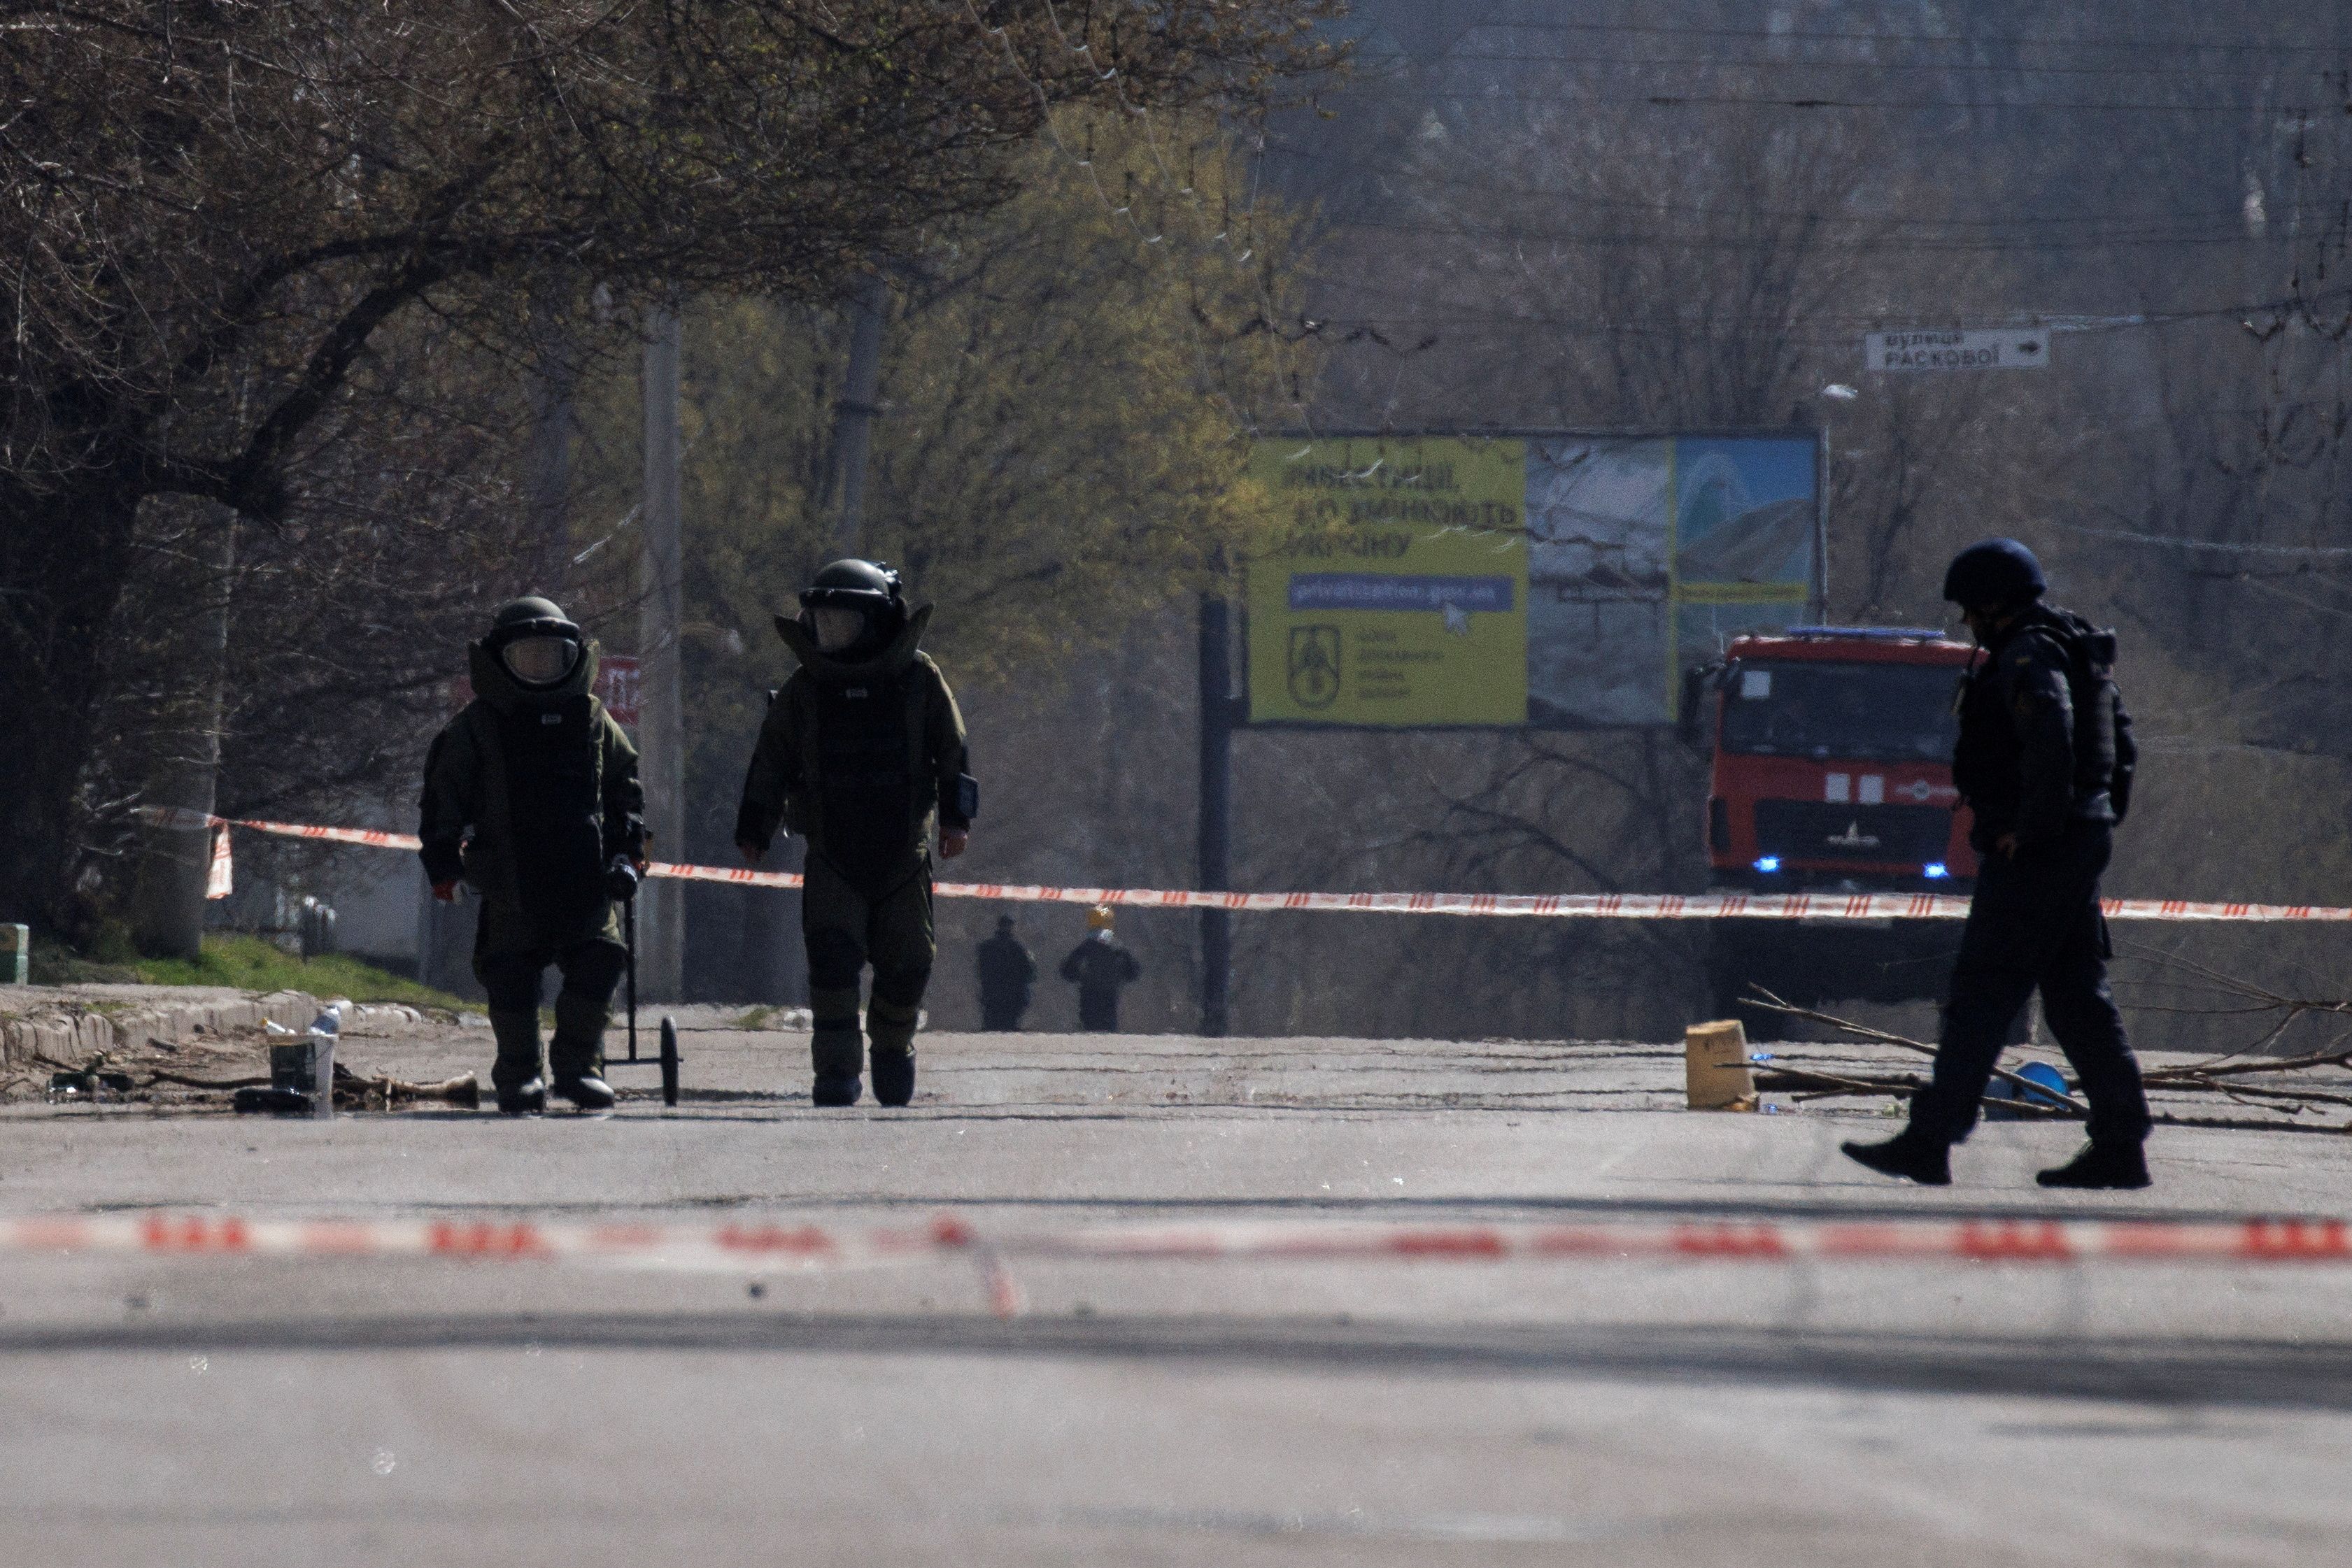 Members of a bomb disposal team conduct a controlled explosion of unexploded ordnance, in Kharkiv